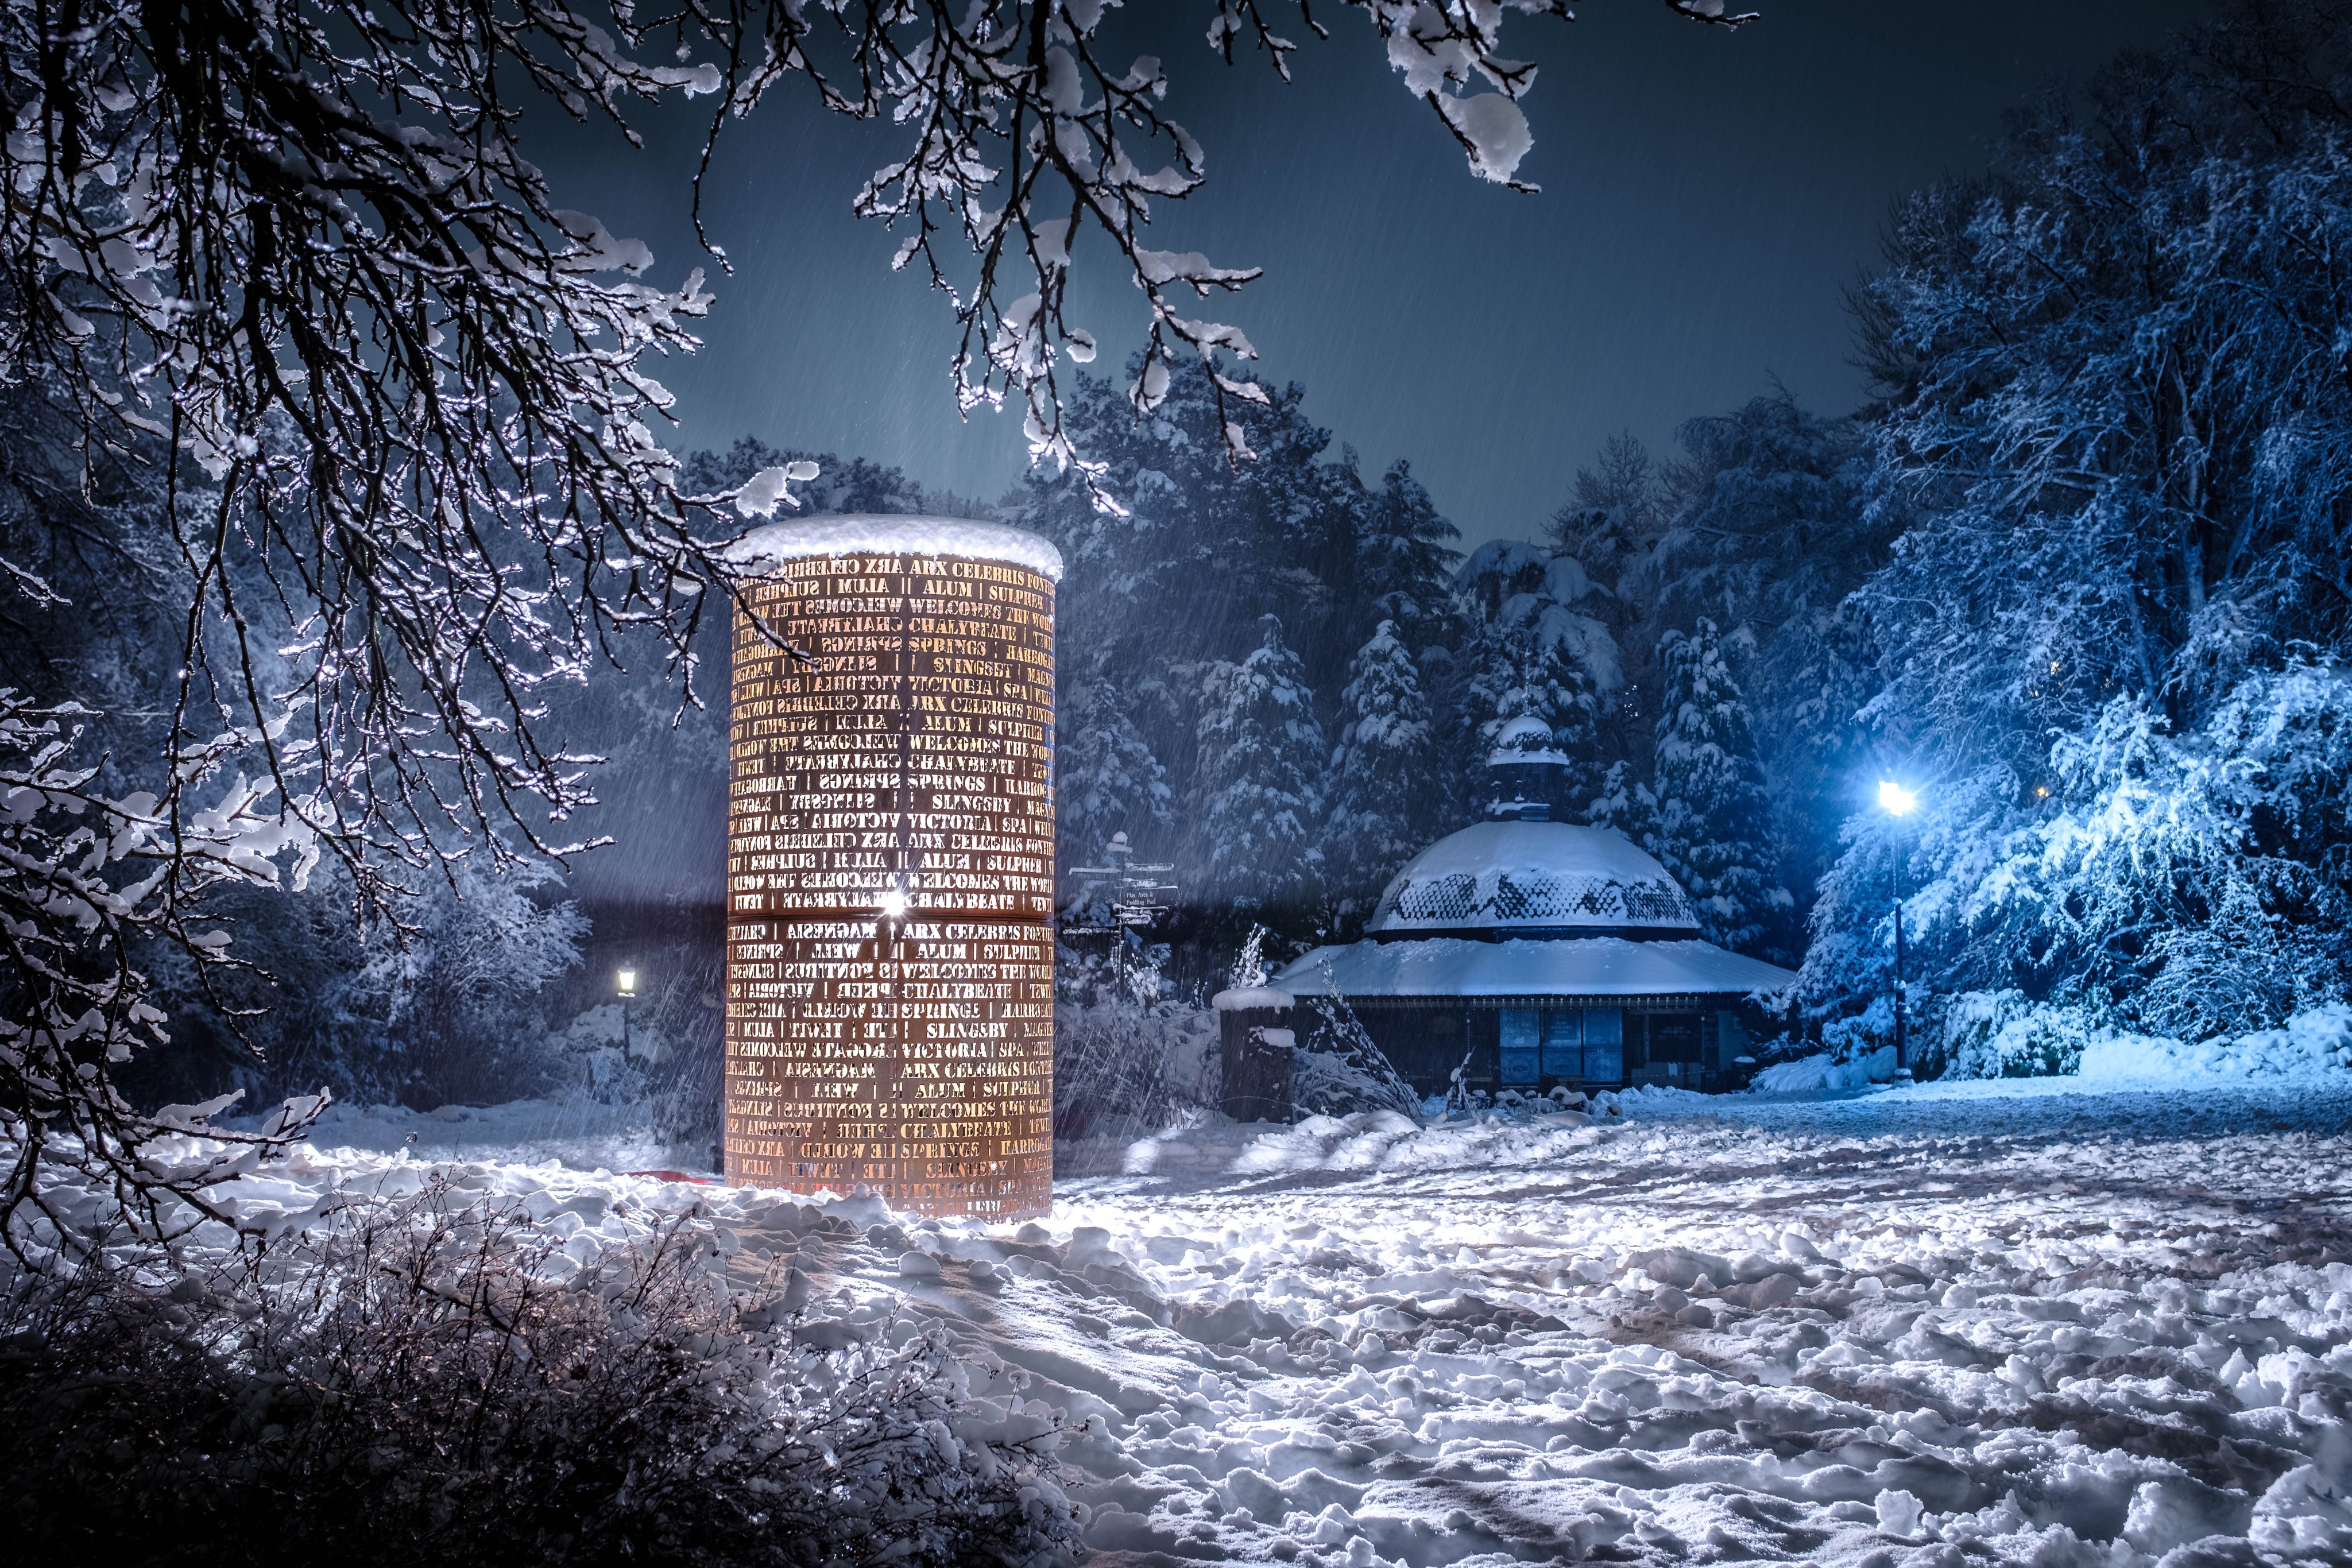 1st Place The 1571 statue in Harrogate lit up the snow on Friday evening Richard Maude @Silverginger